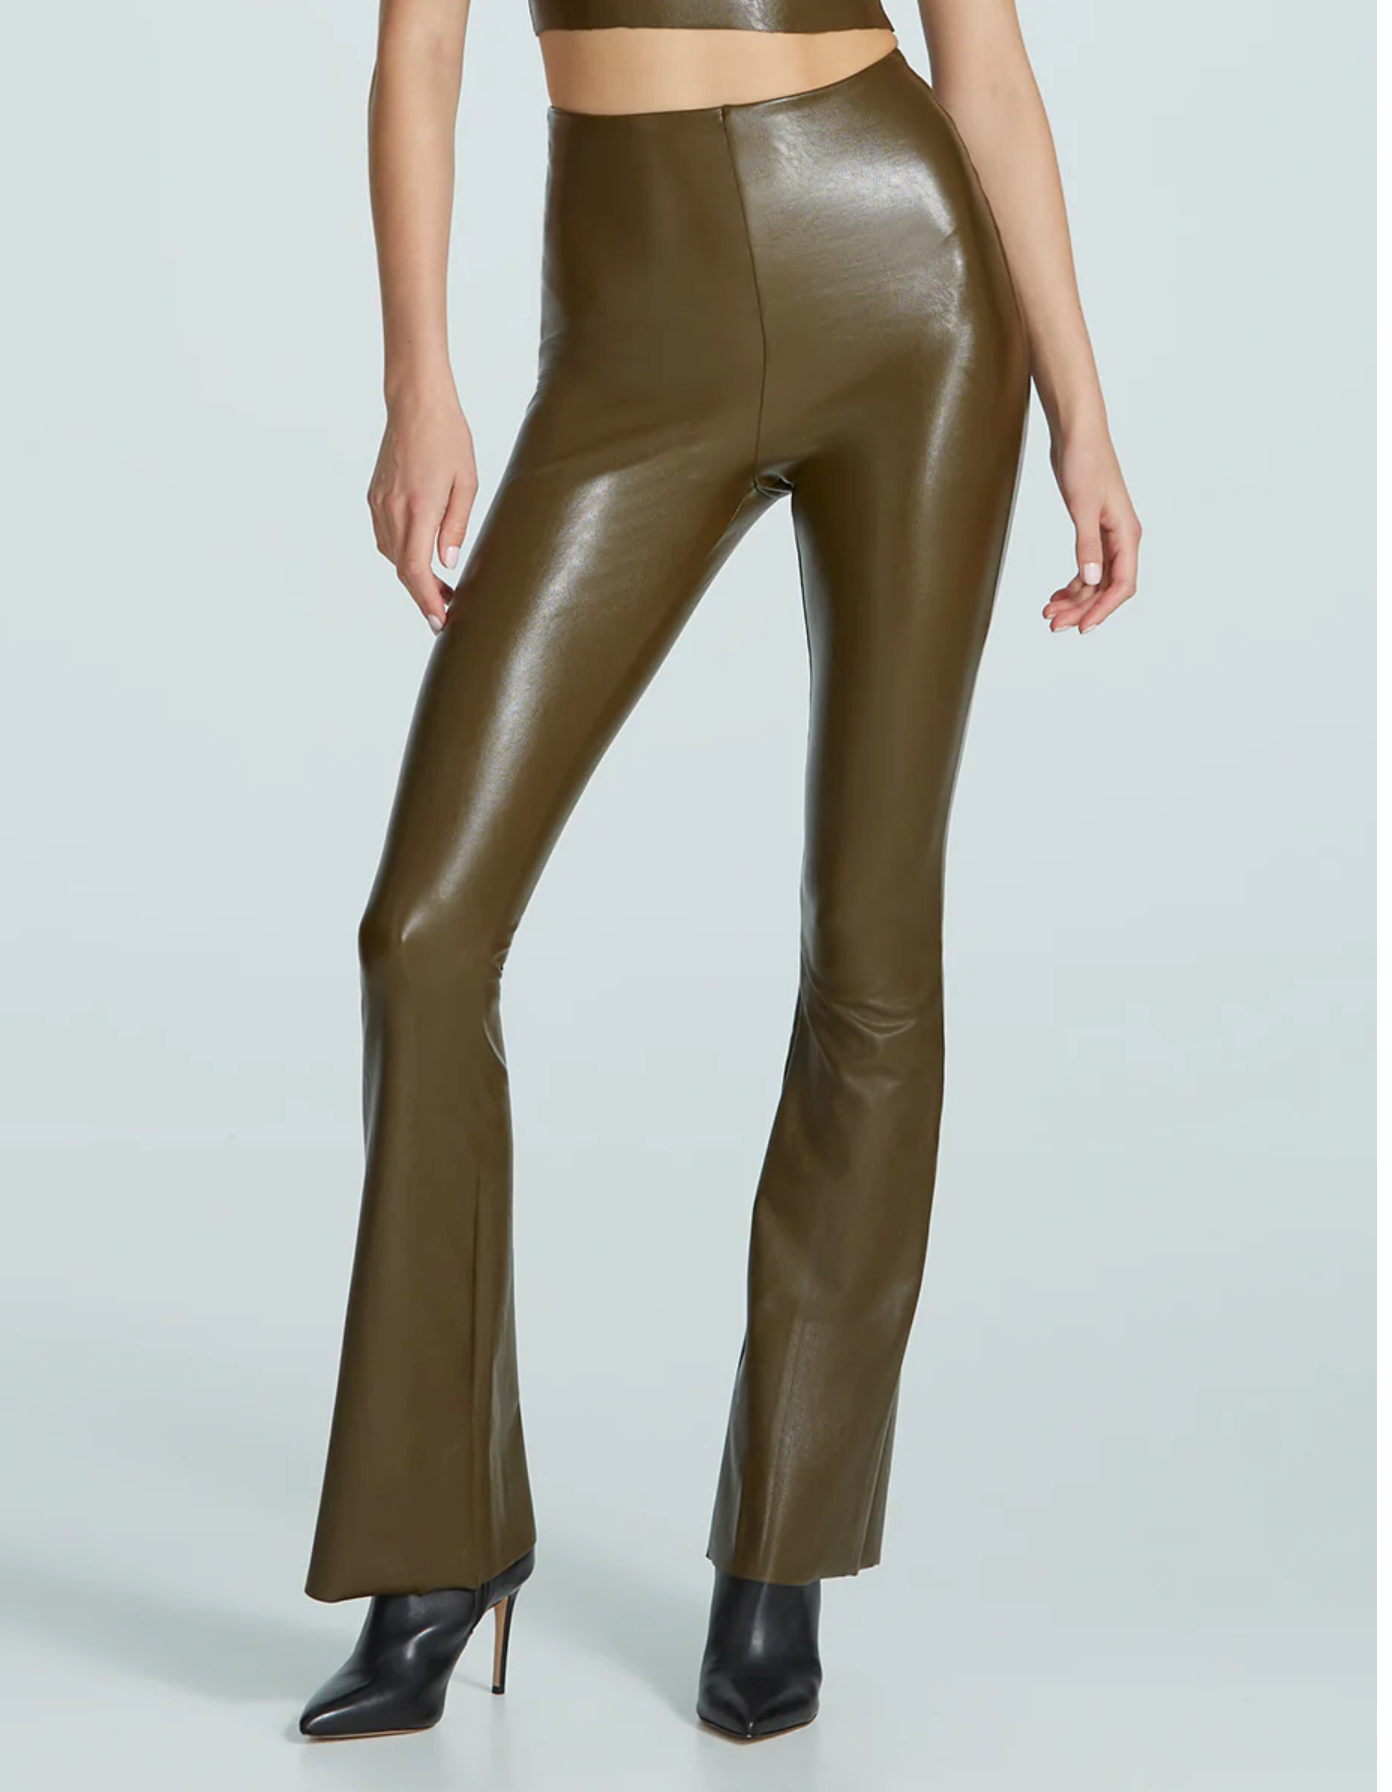 Faux Leather Flare Legging in Cadet